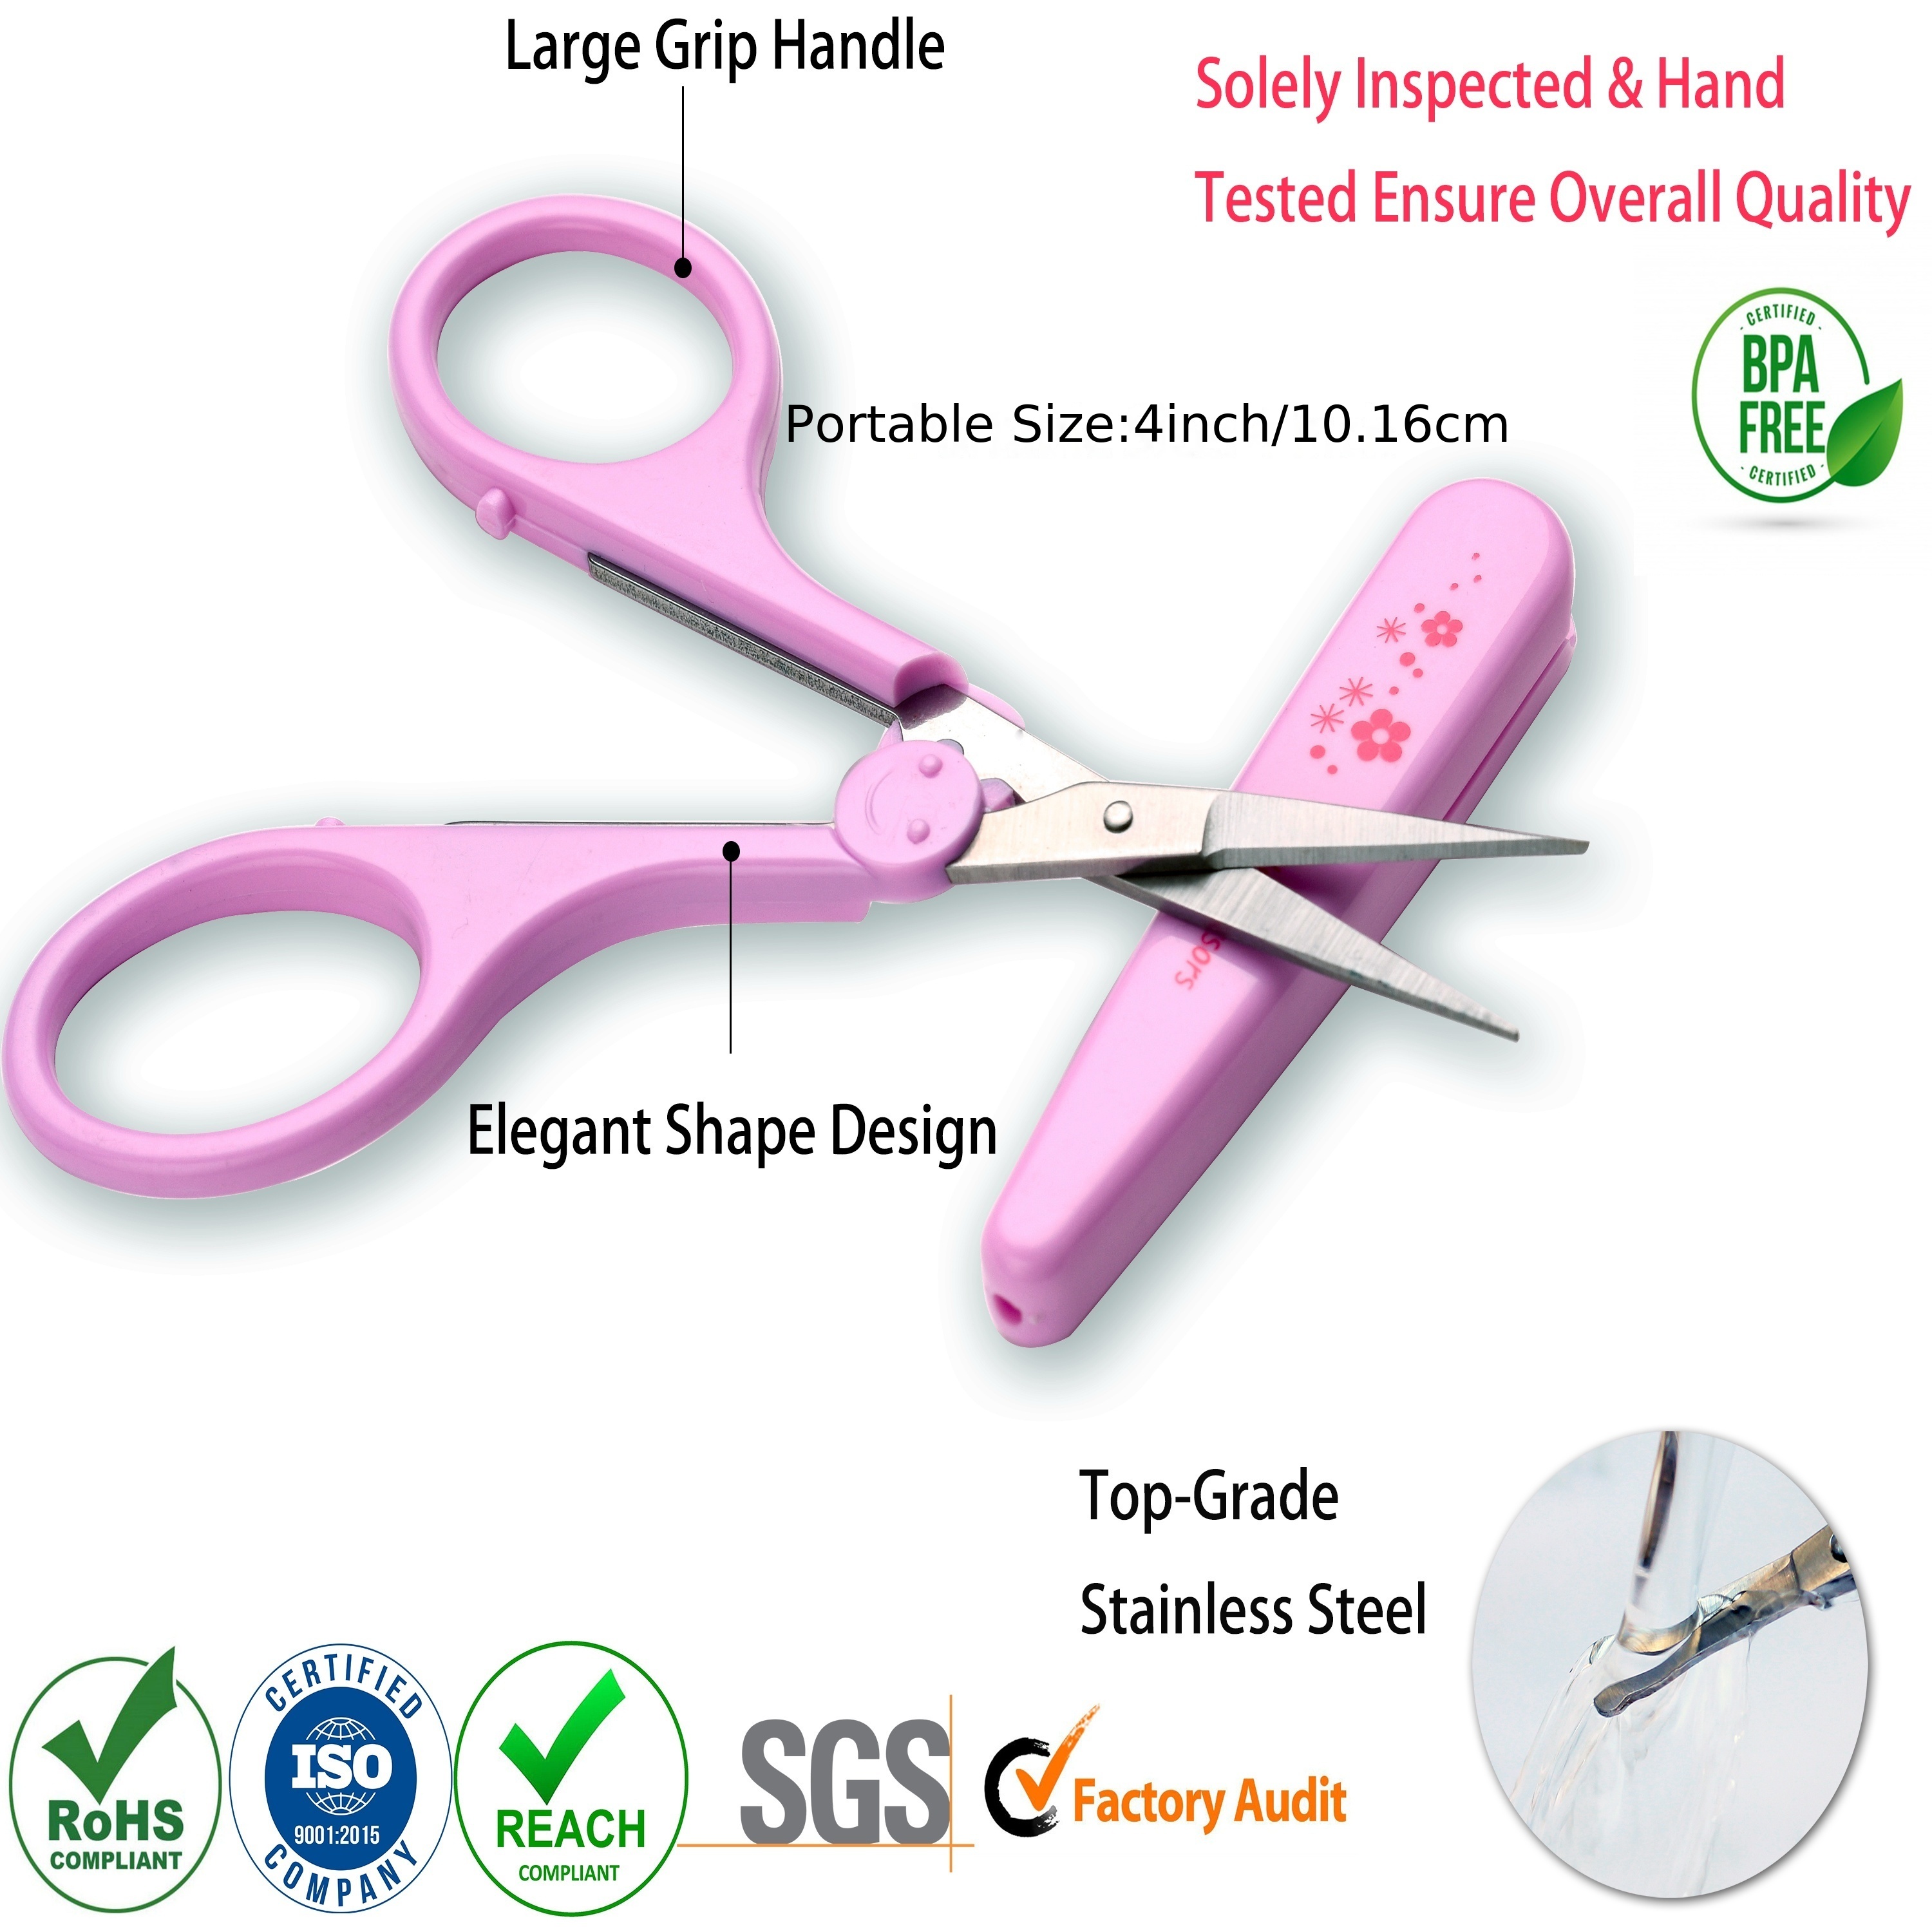 1set Professional Stainless Steel Comfort Grip, All-Purpose, Straight  Office Craft Scissors For Paper Cutting, Scrapbooking, Sewing, Crafting.  Set Of